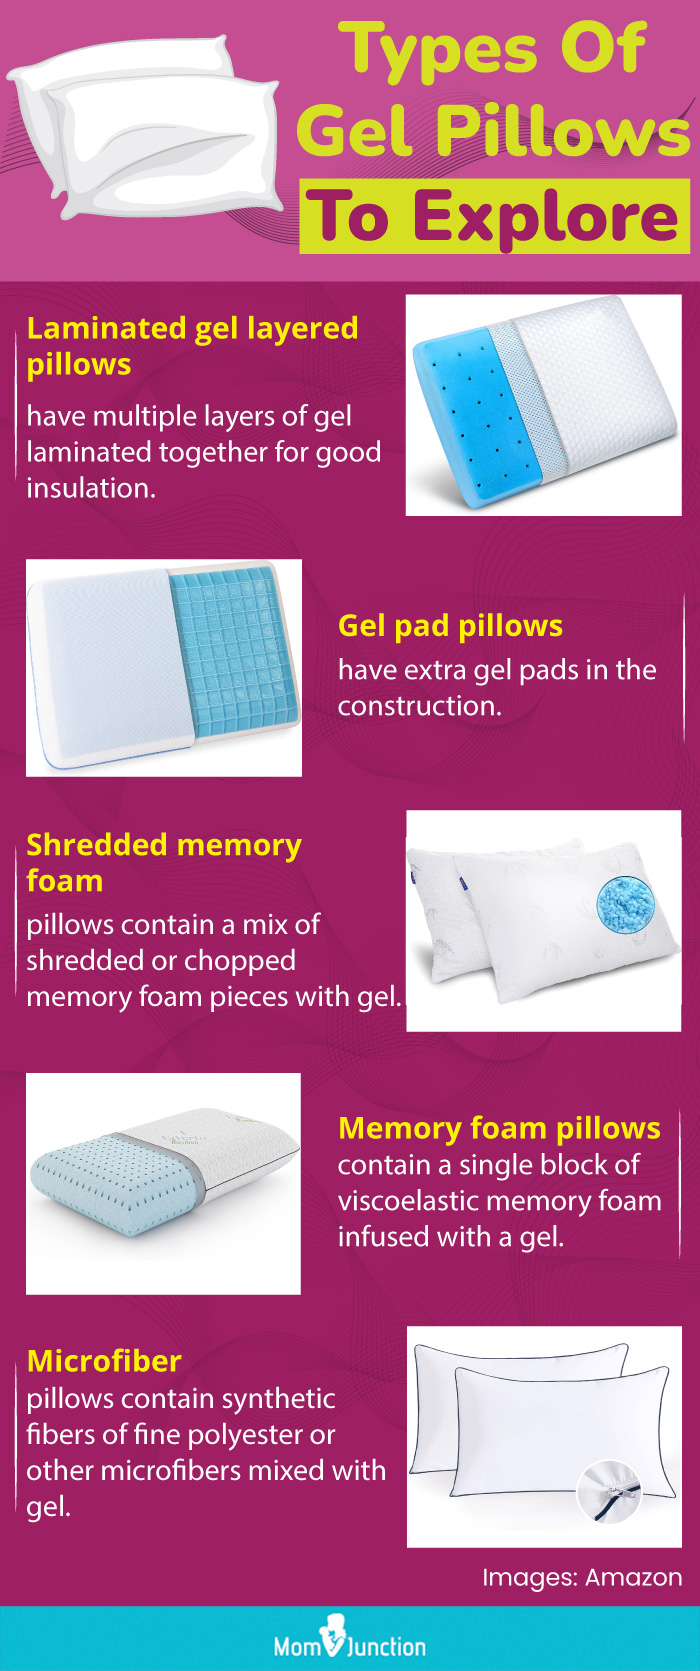 Types Of Gel Pillows To Explore (infographic)